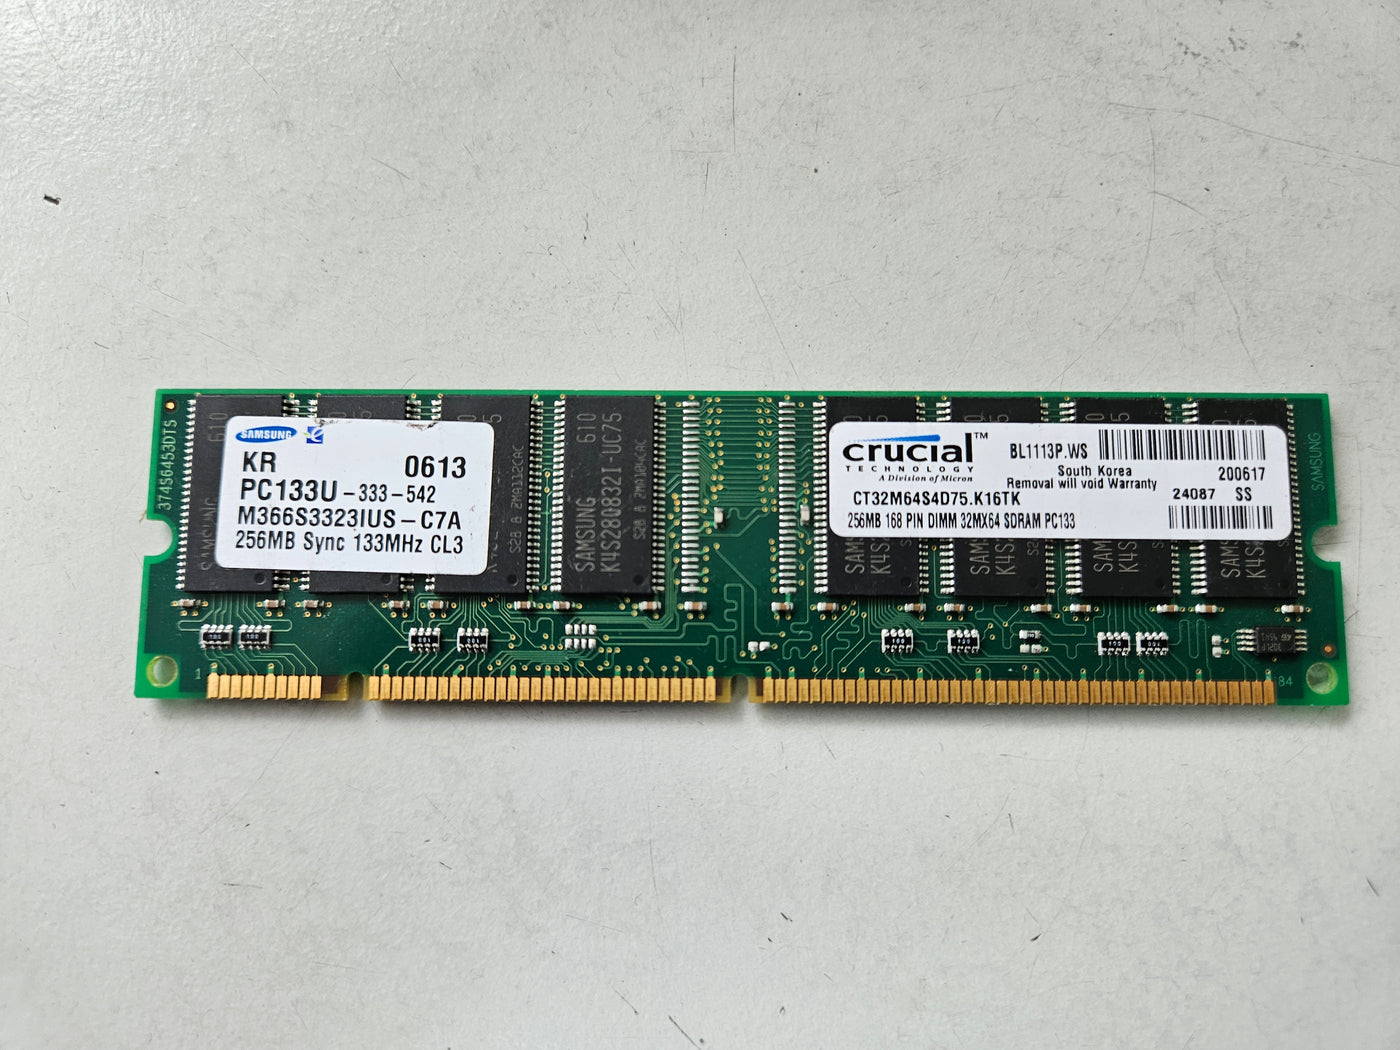 Samsung Crucial 256MB PC133 133MHz CL3 168-Pin DIMM ( M366S3323IUS-C7A CT32M64S4D75.K16TK ) REF